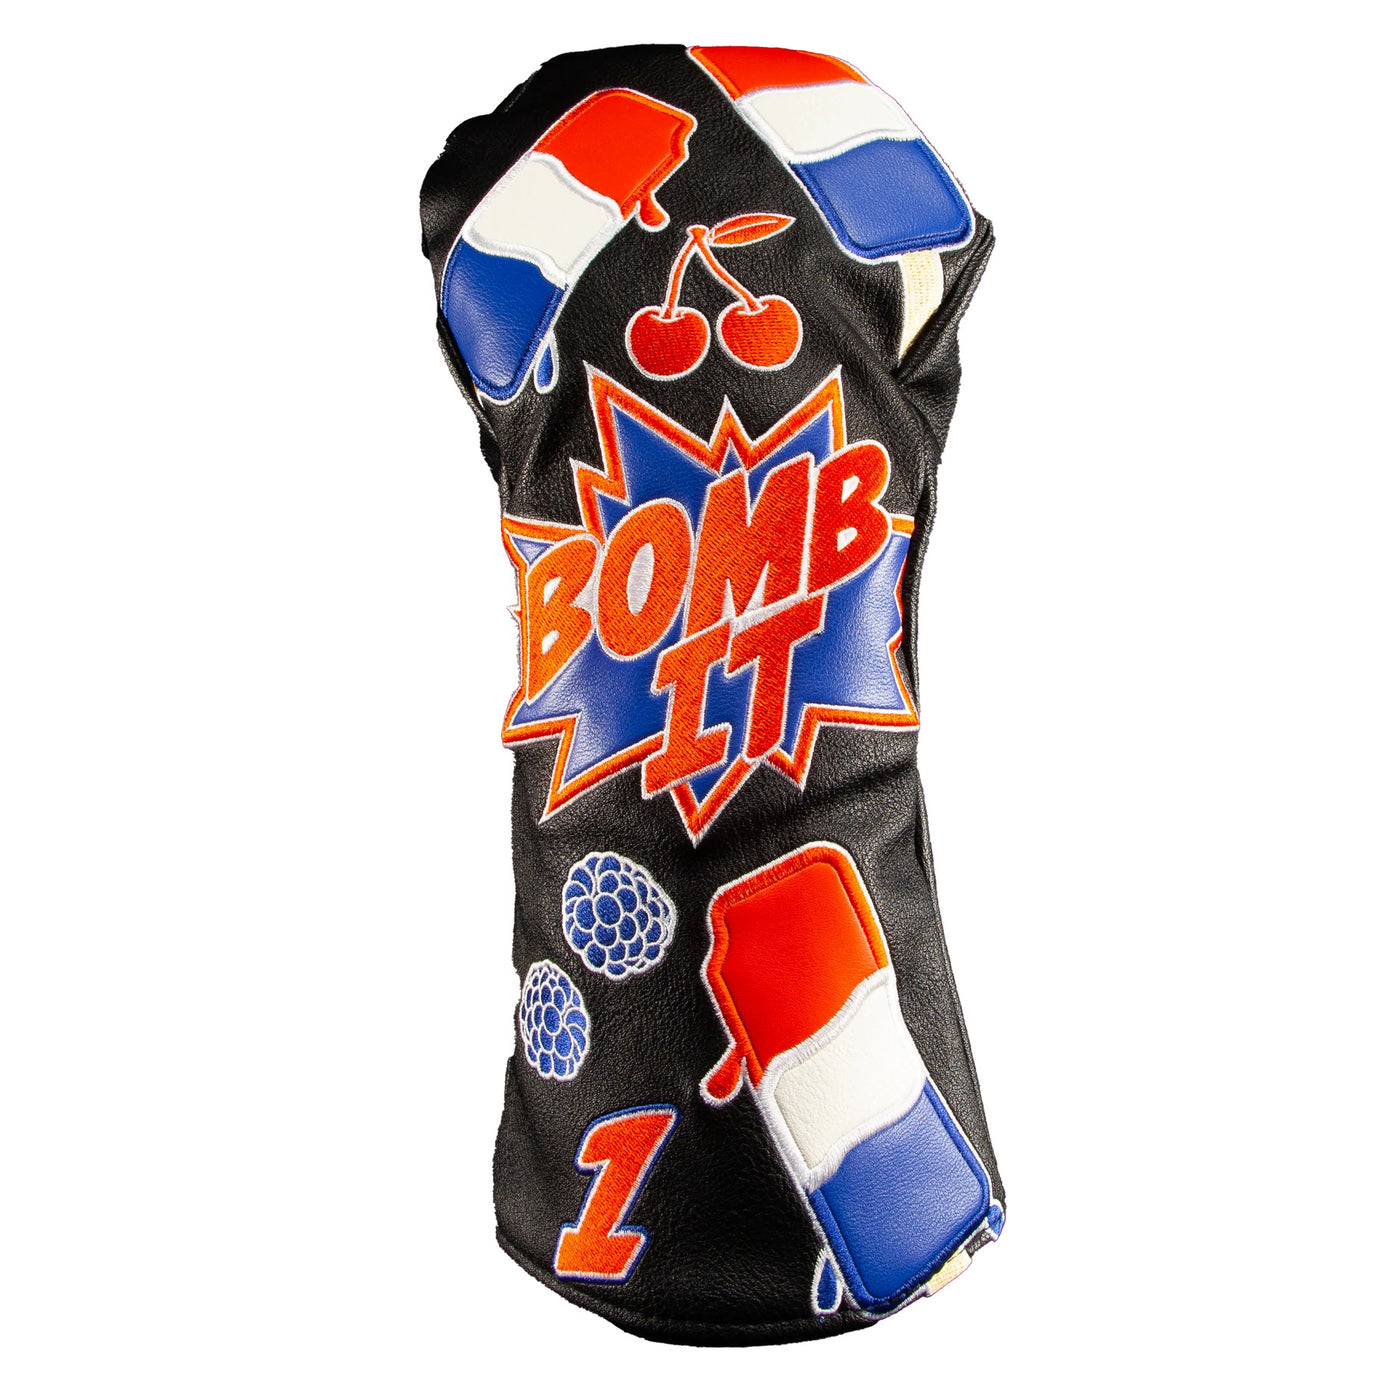 Bomb-It Driver Headcover